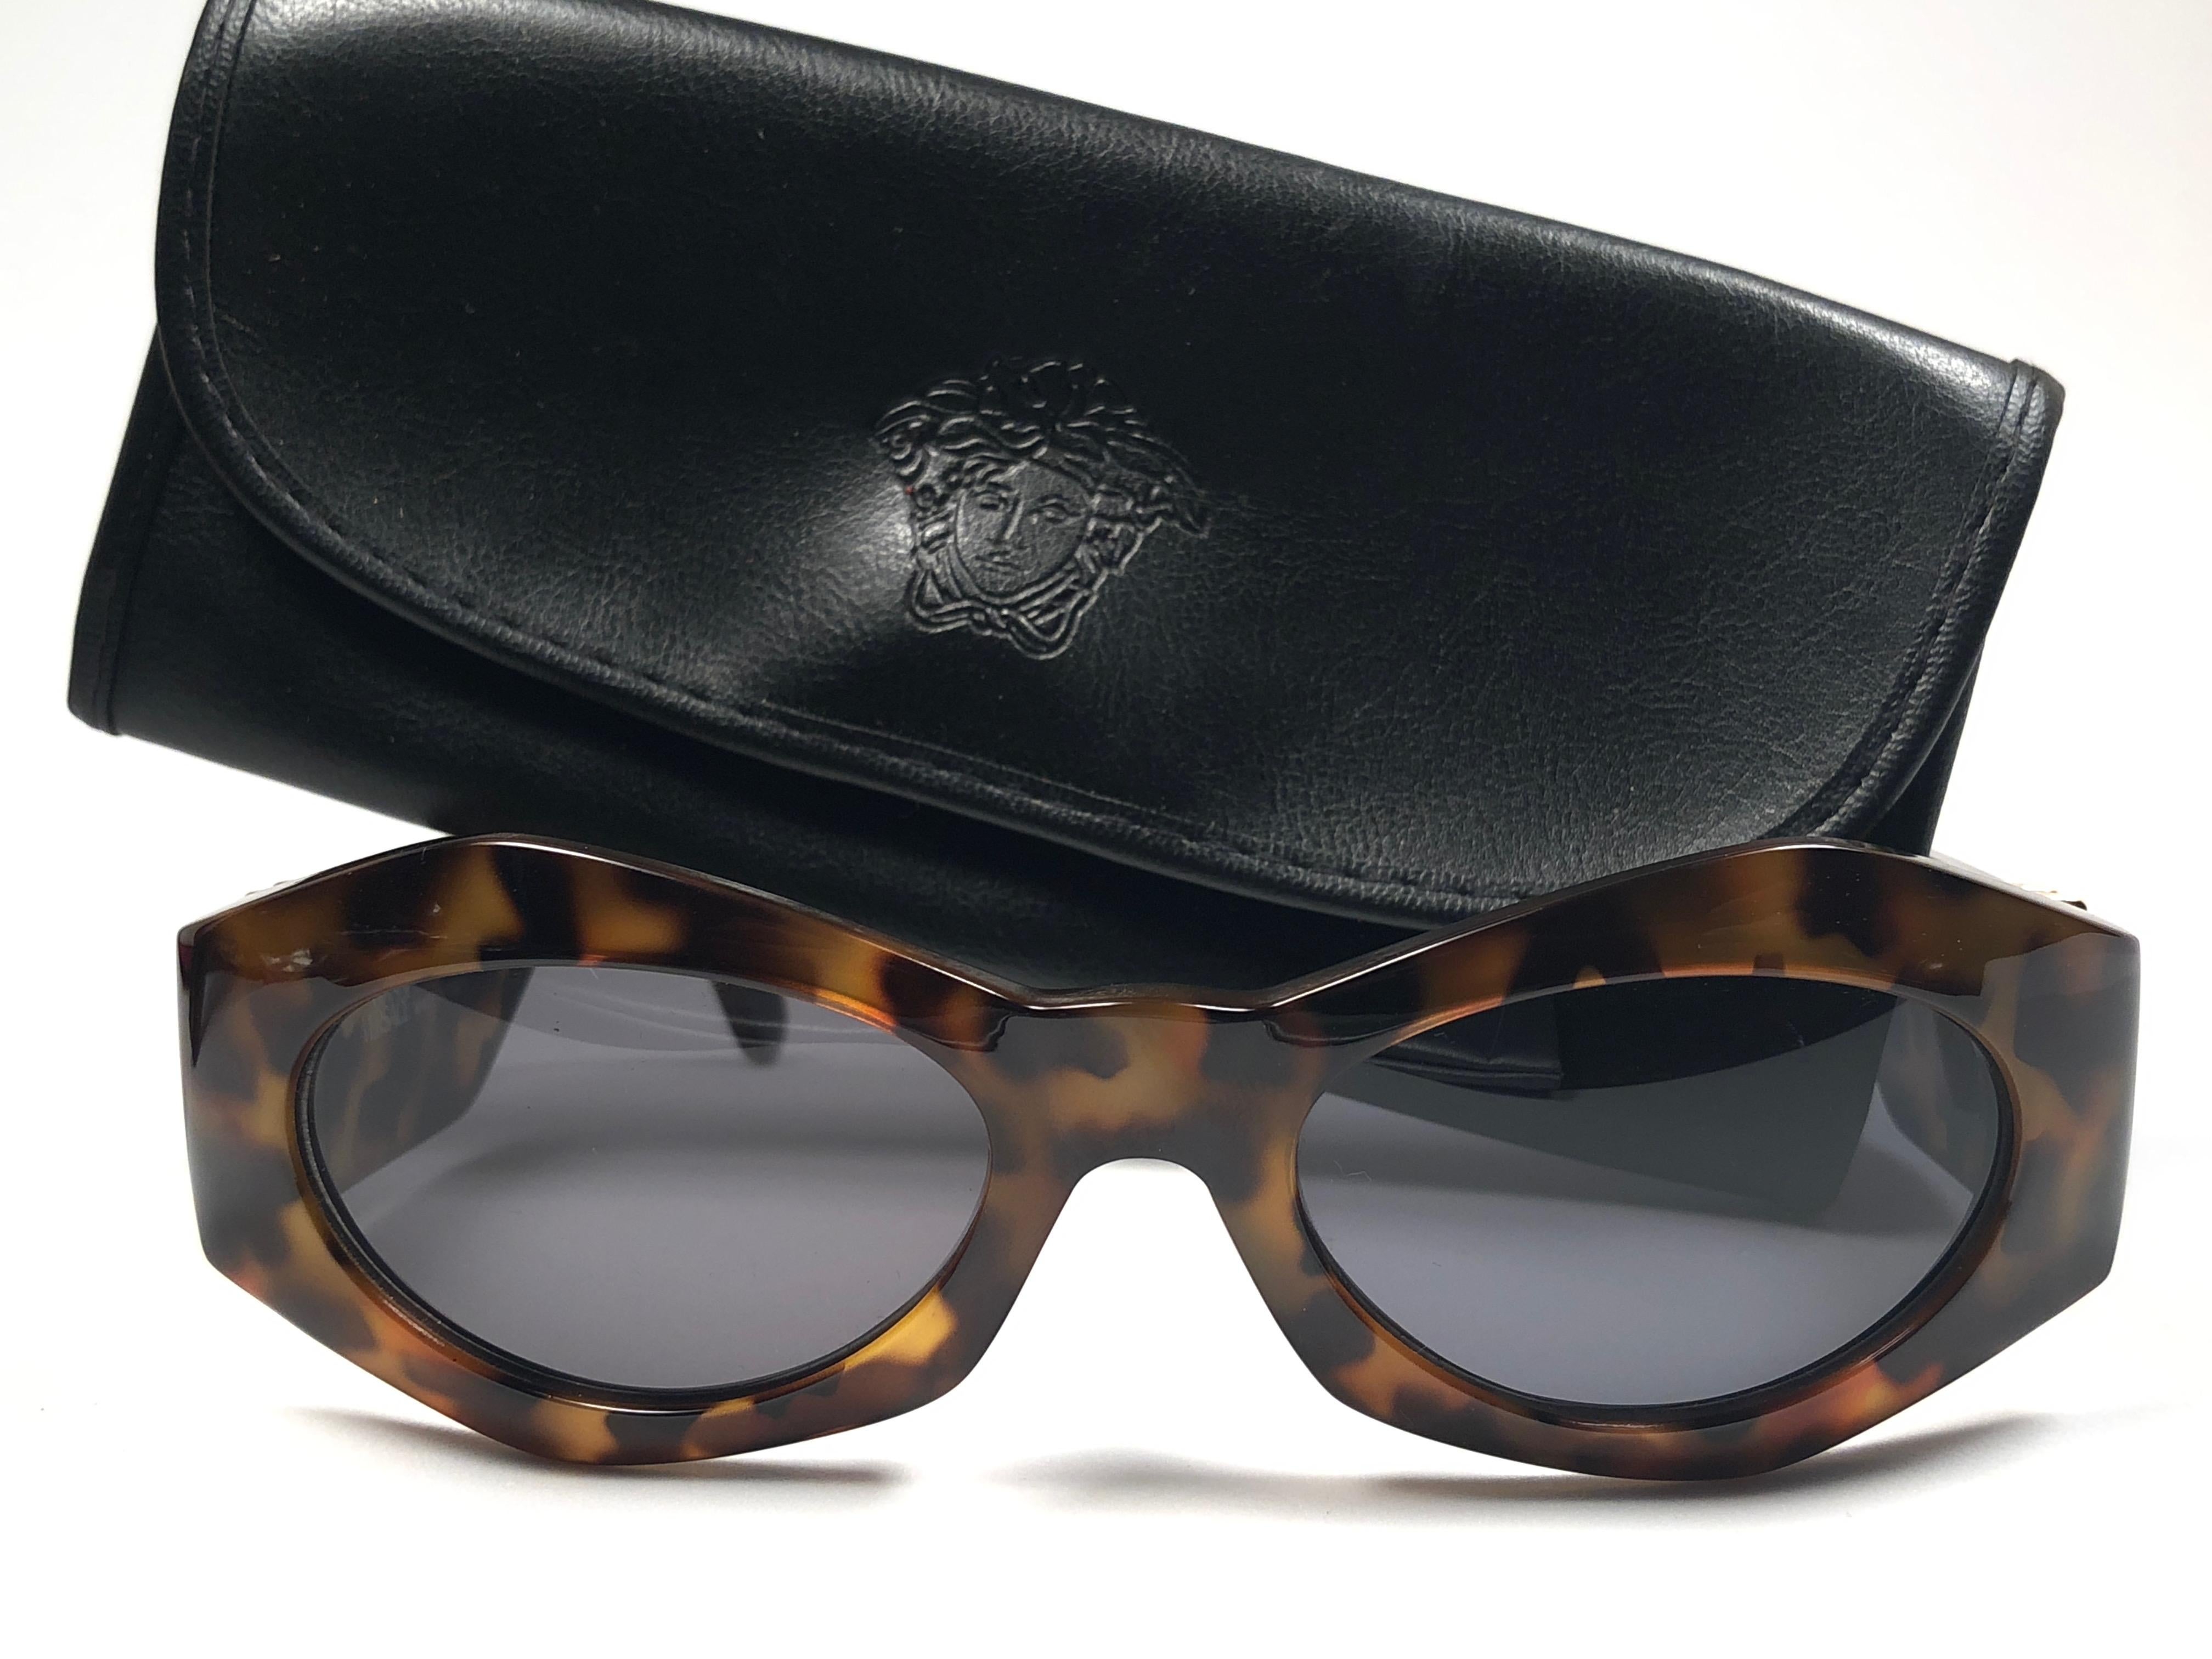 Women's or Men's New Vintage Gianni Versace 422 Tortoise Sunglasses 1990's Made in Italy